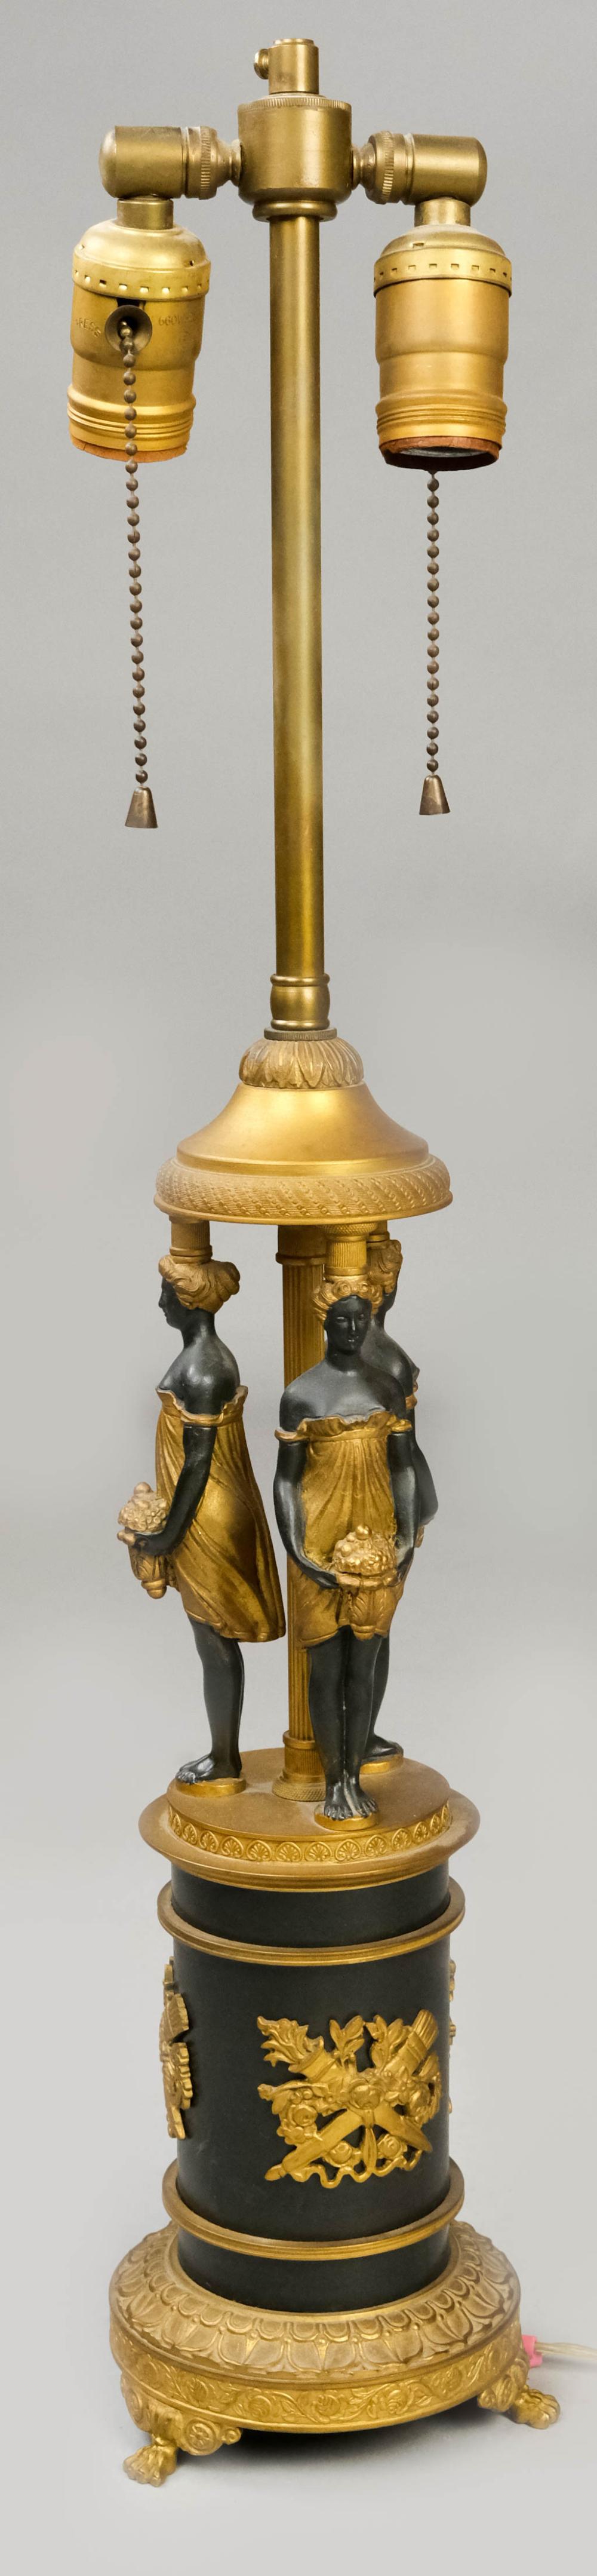 NEOCLASSICAL BRONZE AND GILT FIGURAL